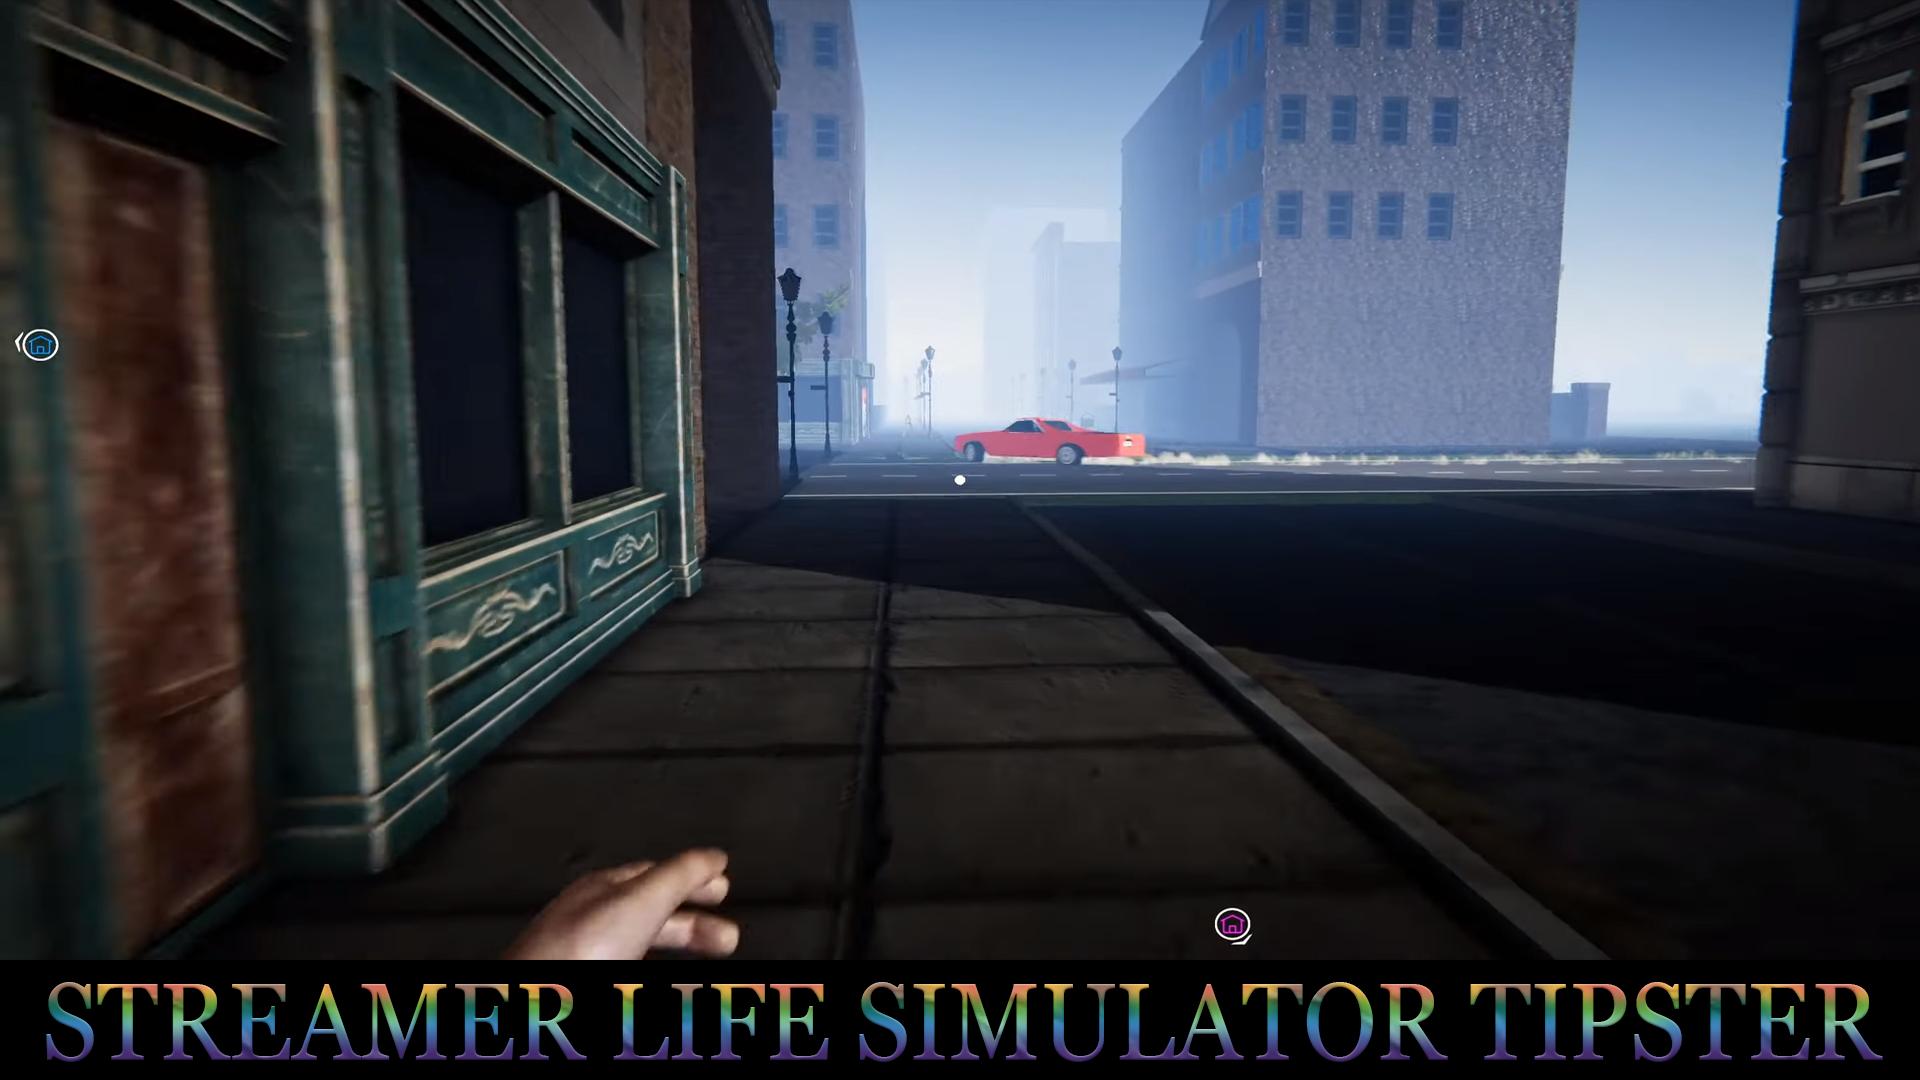 Guide Streamer Life Simulator for Android - Download